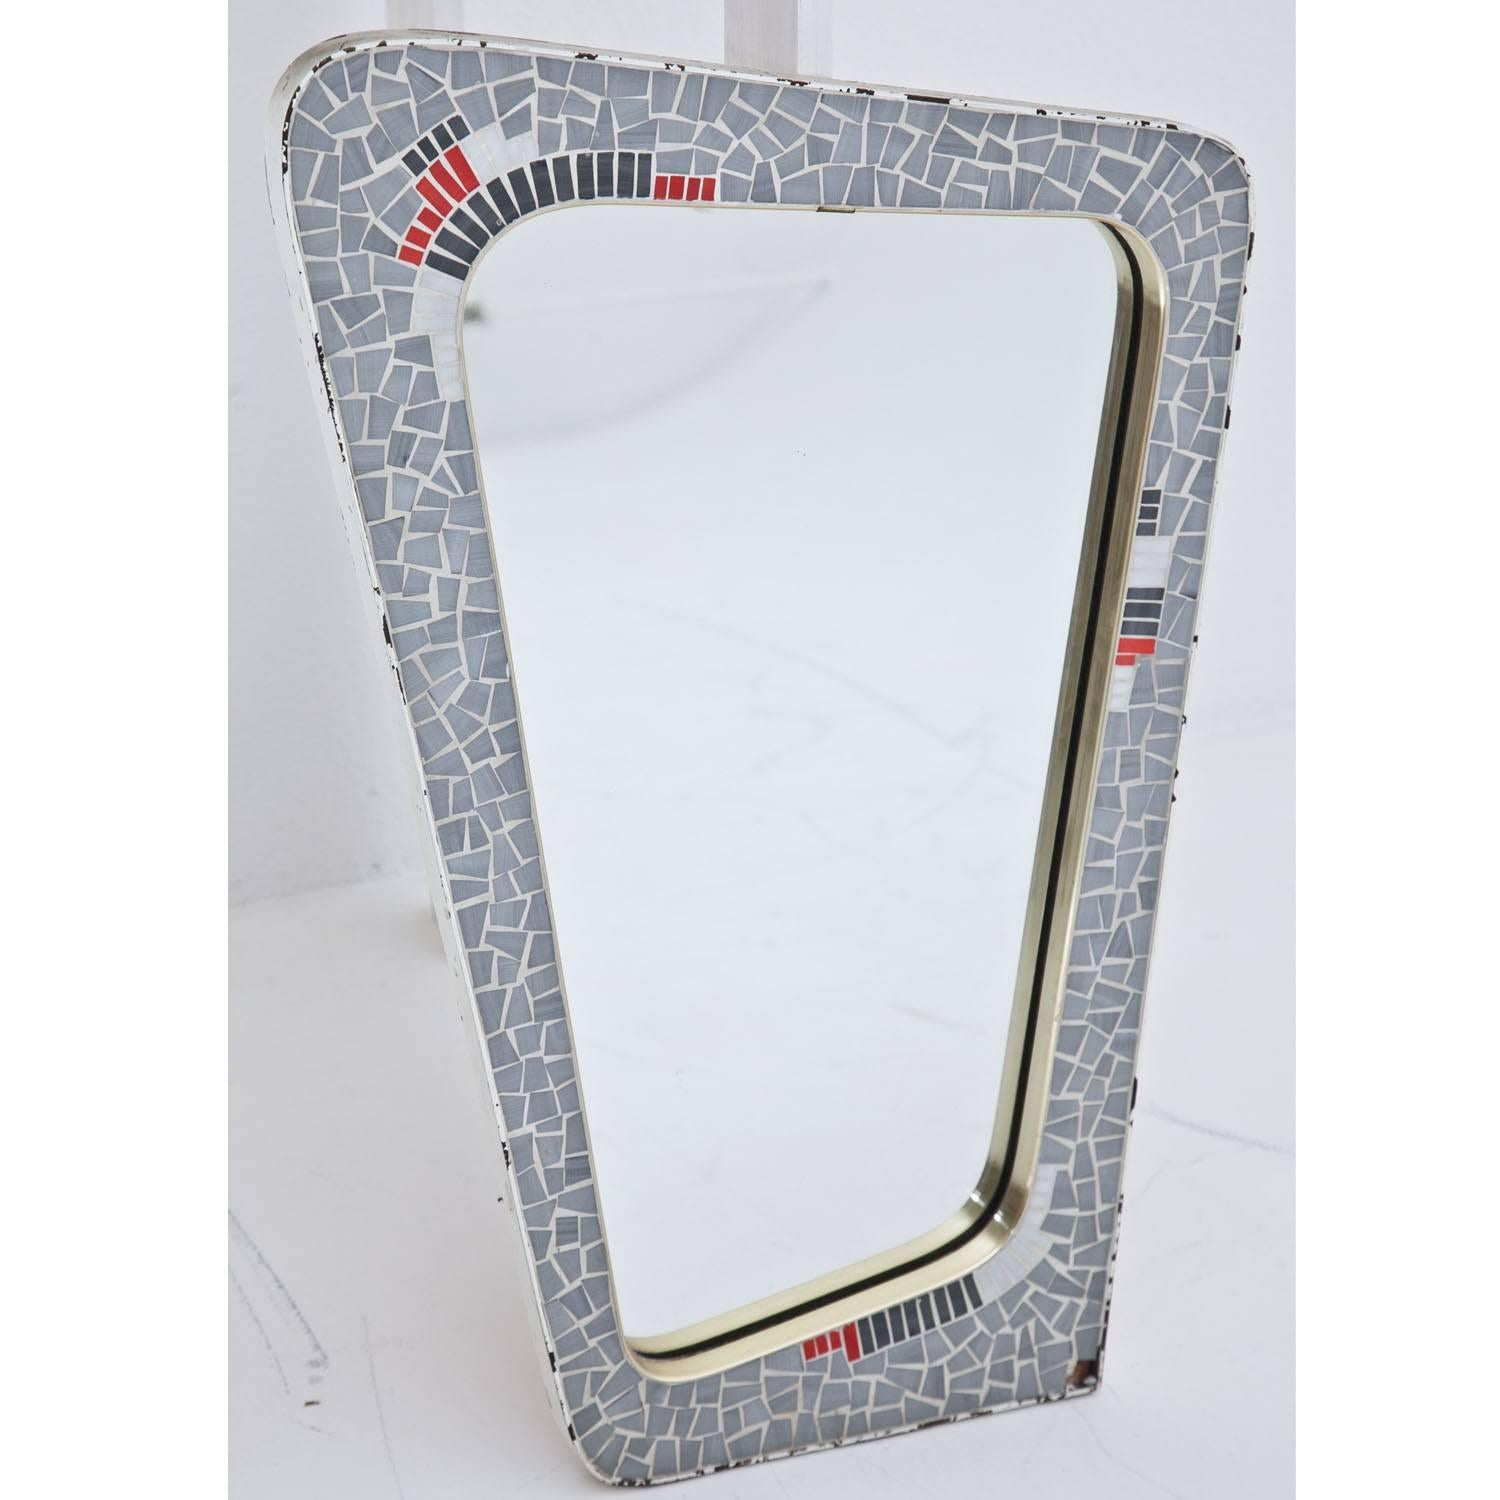 Asymmetrical wall mirror in a trapezoidal mosaic frame with blue-grey stones and red accents. One stone is missing in the bottom right corner. Label on the back, saying “Lilienthal Mosaic mirror, Model ‘Carmen’ ”.